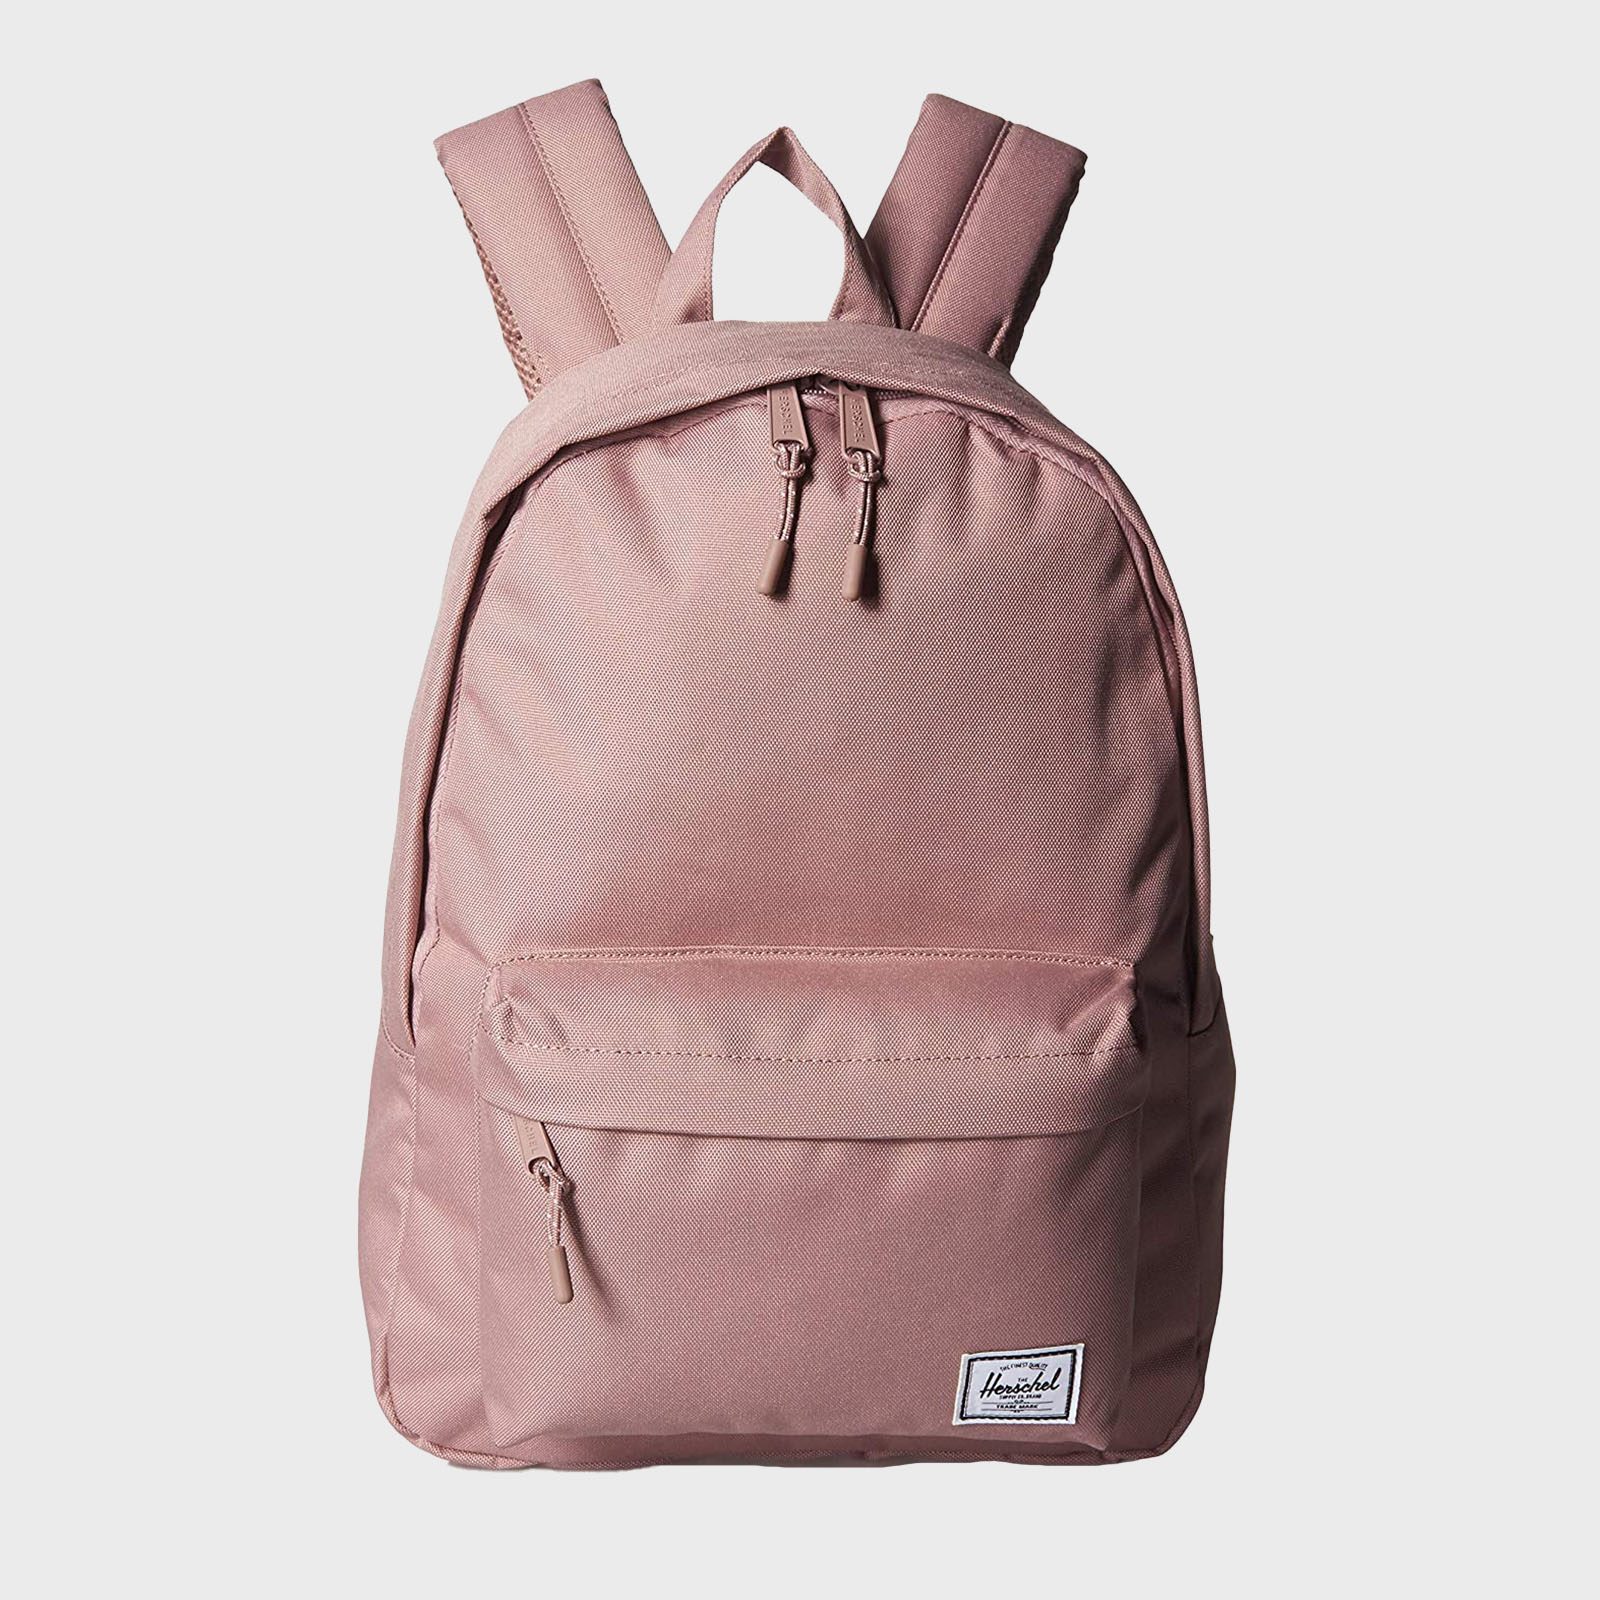 17 Best Backpacks for Every Day 2022 — School, Commuting, Travel